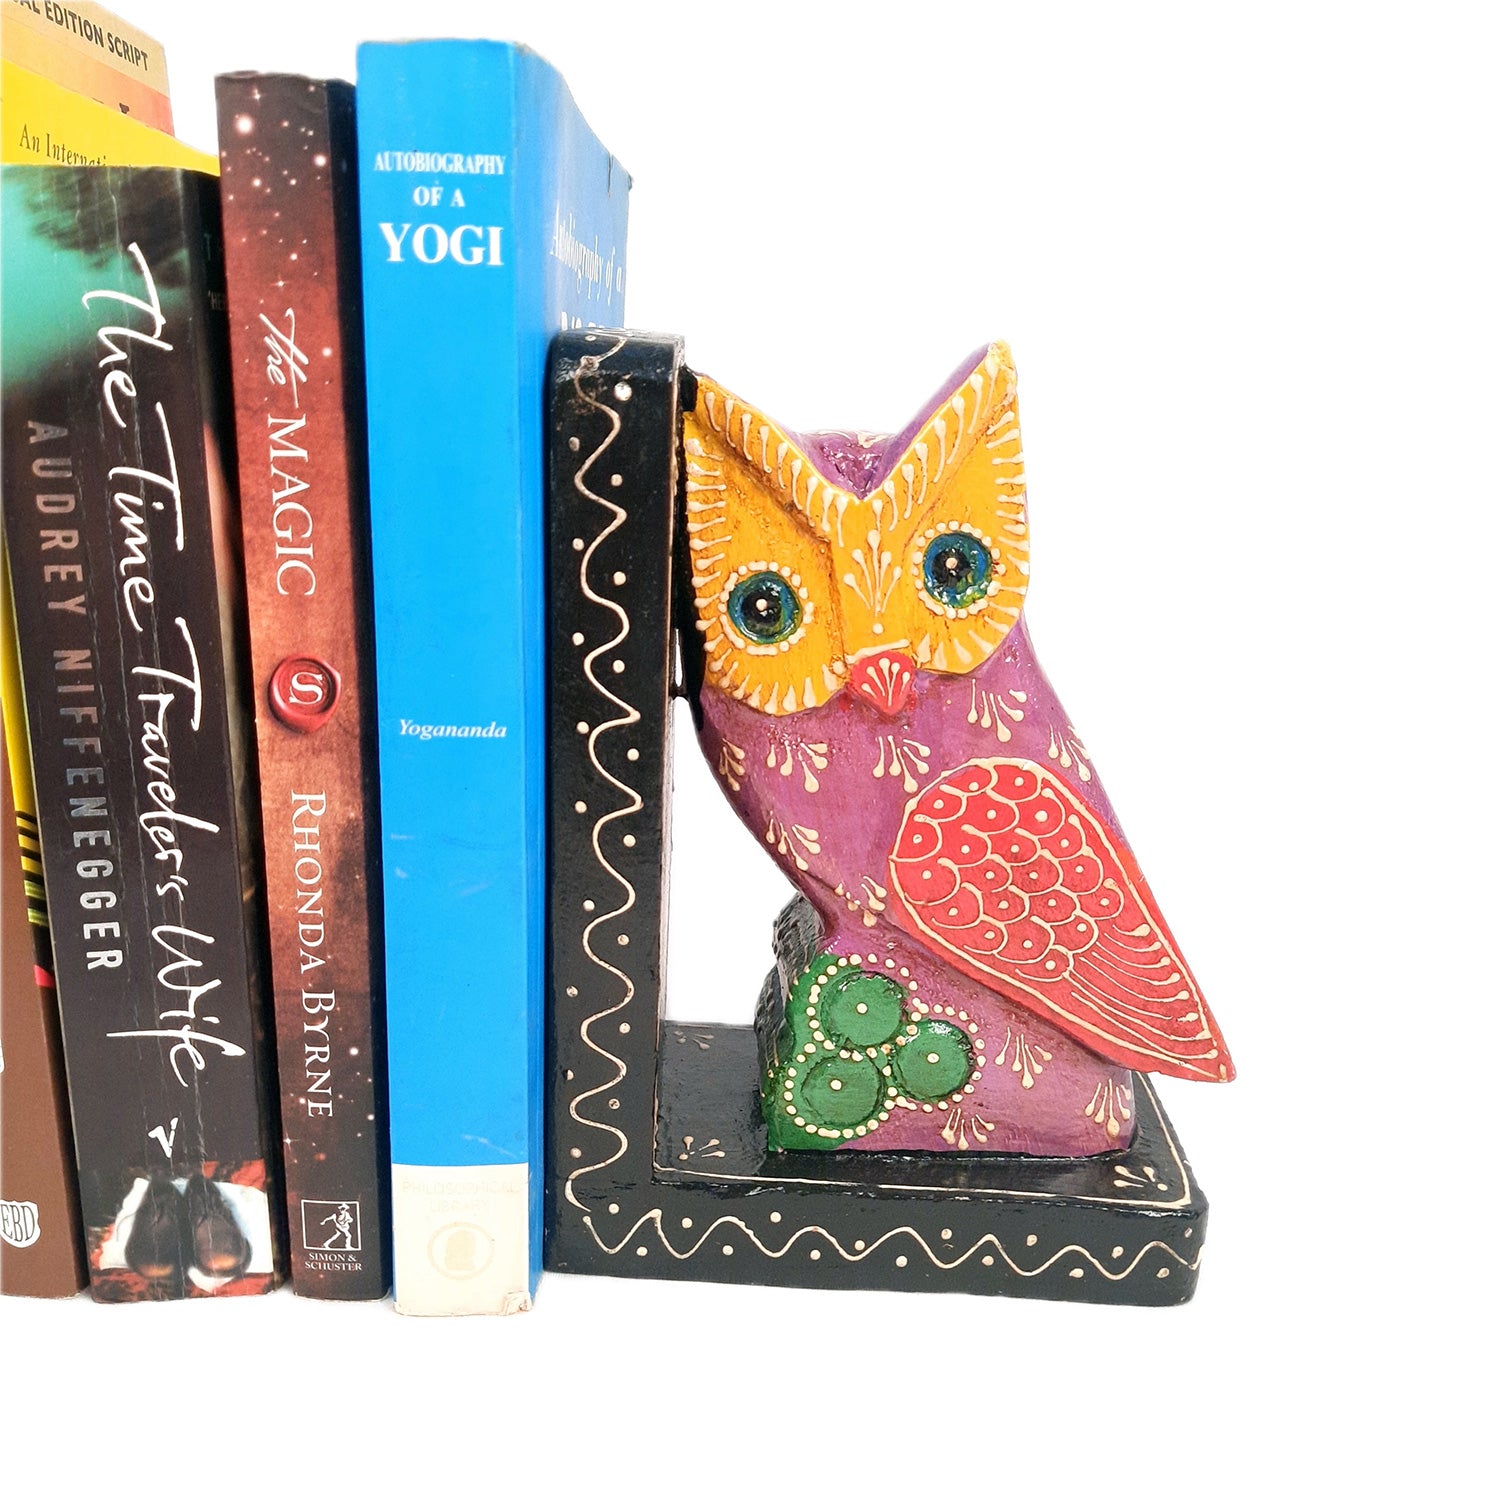 Wooden Book Ends - Owl Design | Quirky Book Organizer | Book Racks Shelf - For Home, Table, Shelves, Kids Room, Study, Office Decor & Gifts -8 Inch - Apkamart